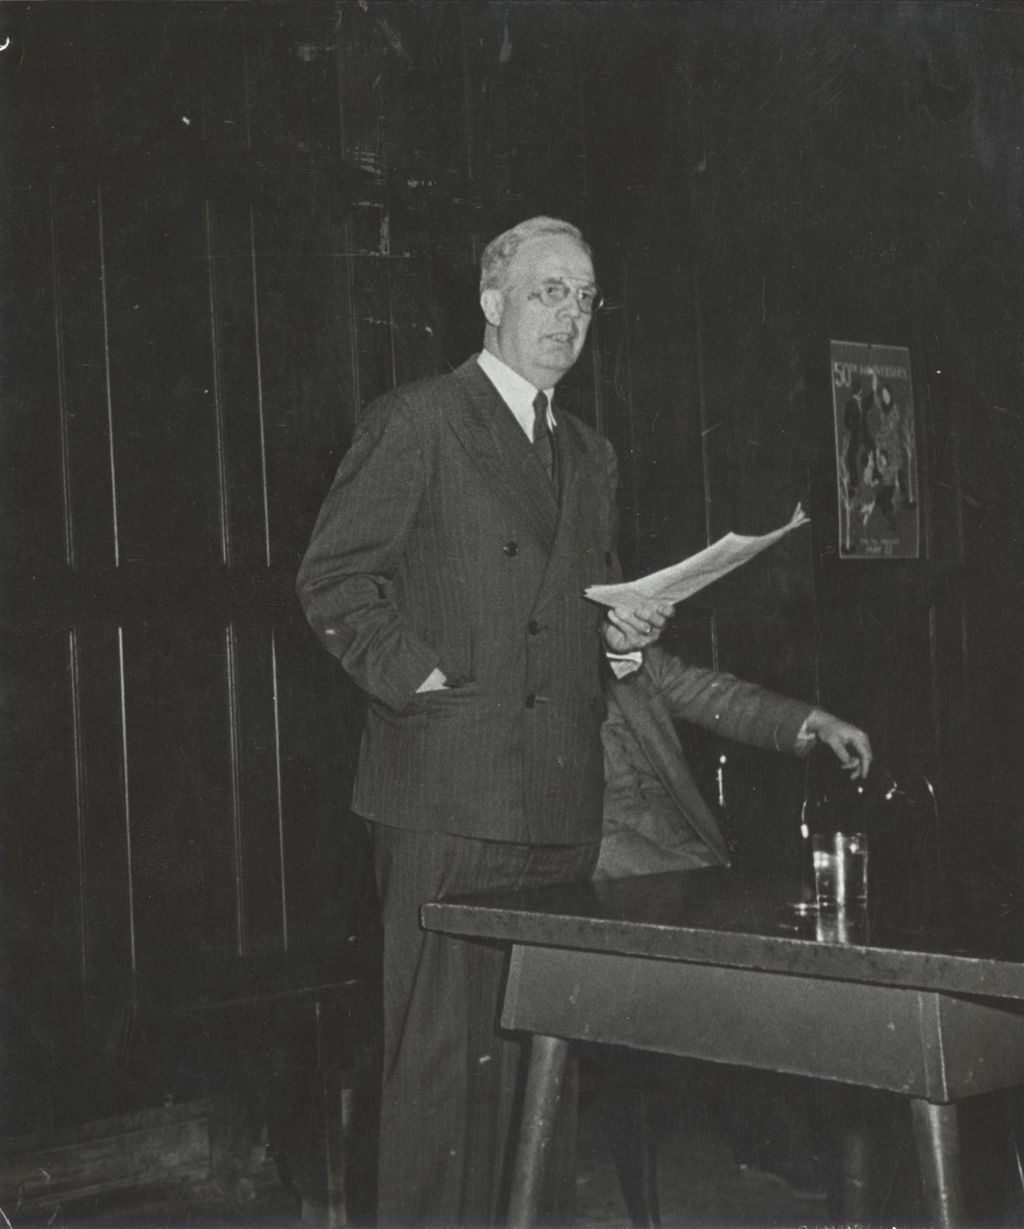 Clarence E. Pickett, executive secretary of the American Friends Service Committee, speaking at an event celebrating the 50th Anniversary of Hull-House